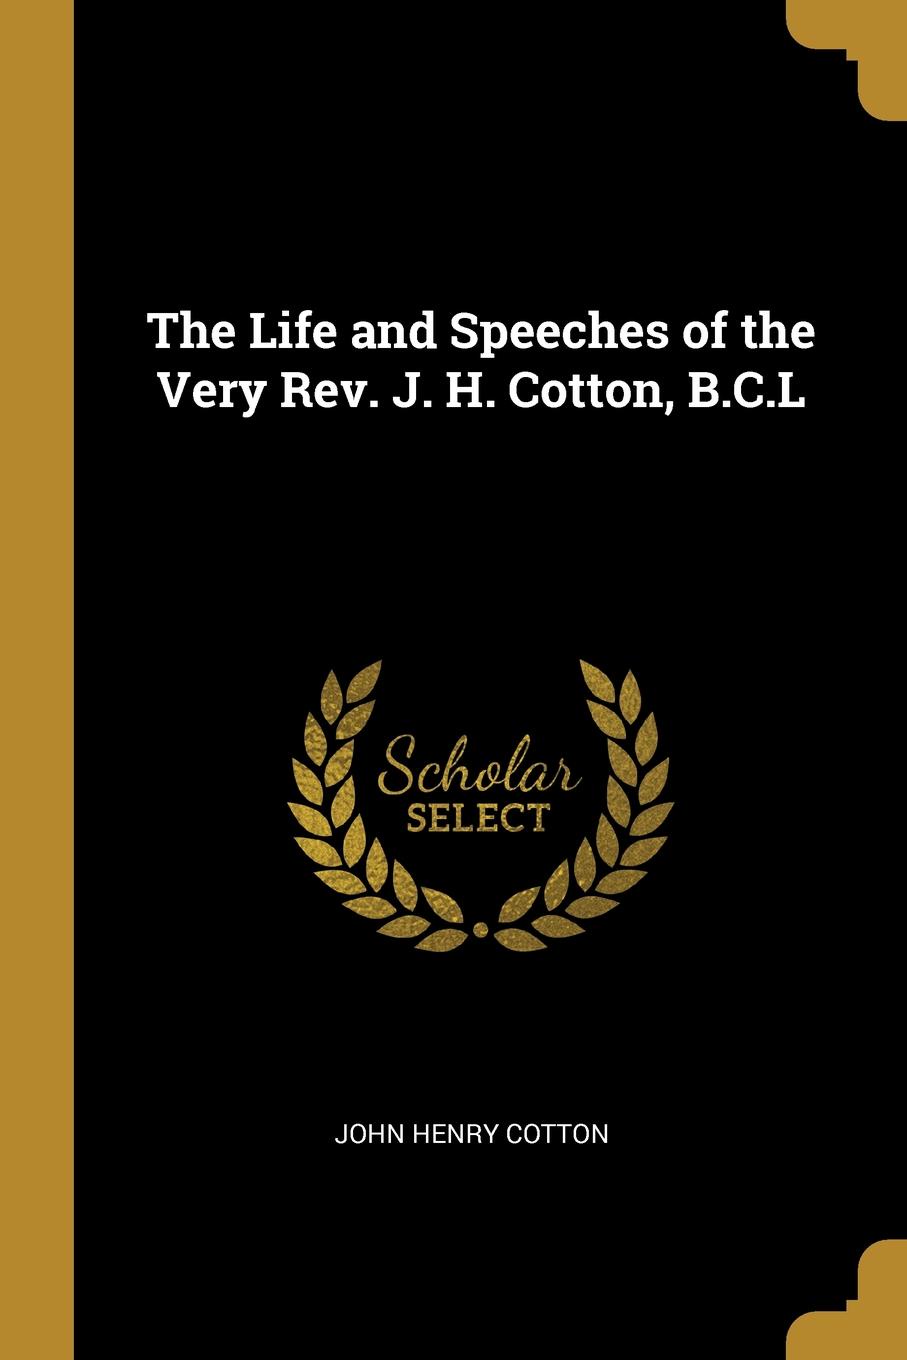 фото The Life and Speeches of the Very Rev. J. H. Cotton, B.C.L